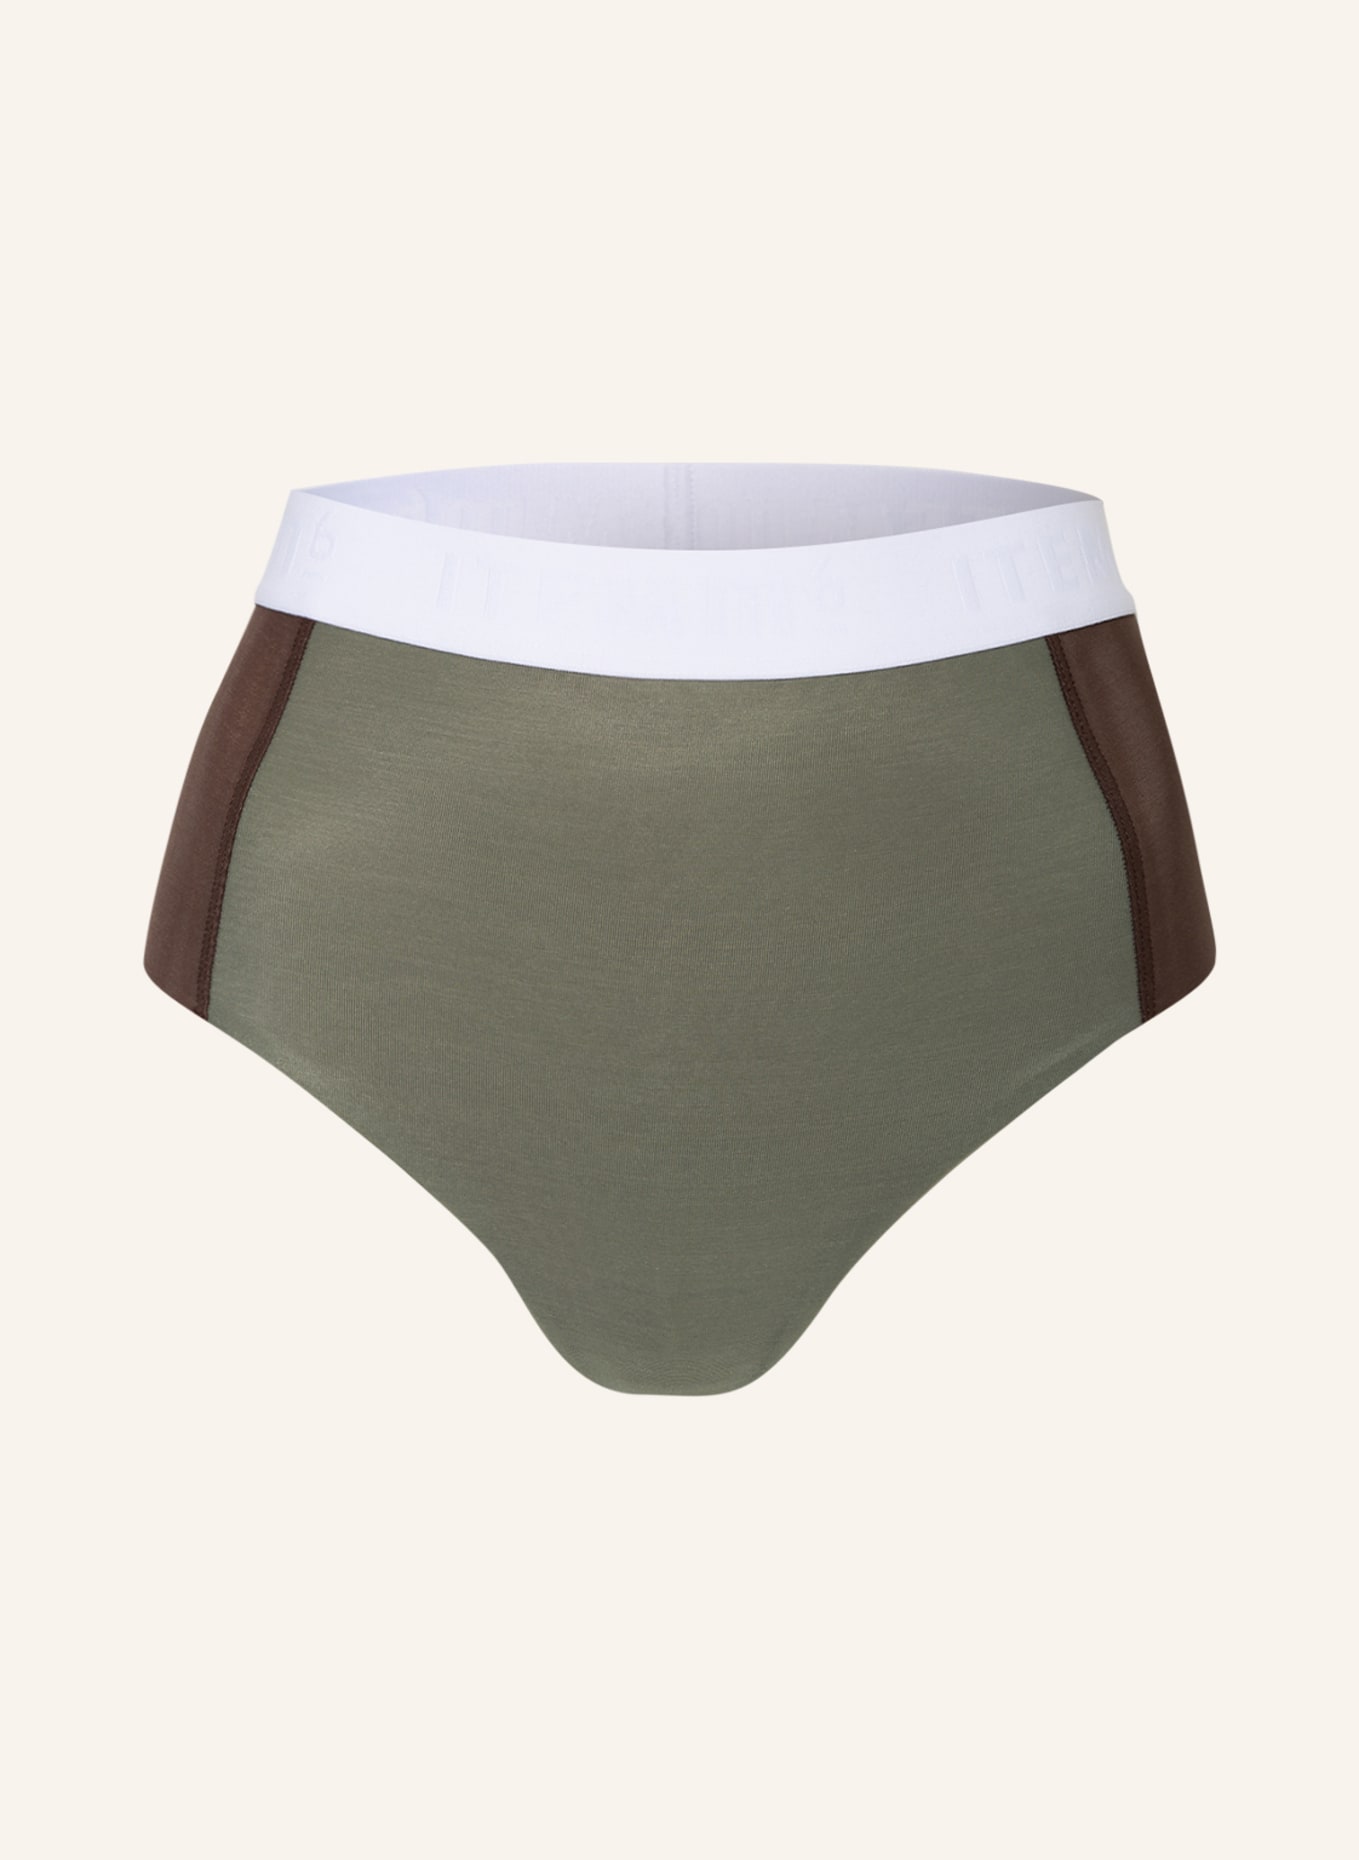 ITEM m6 Shaping briefs ALL MESH, Color: OLIVE/ BROWN/ WHITE (Image 1)